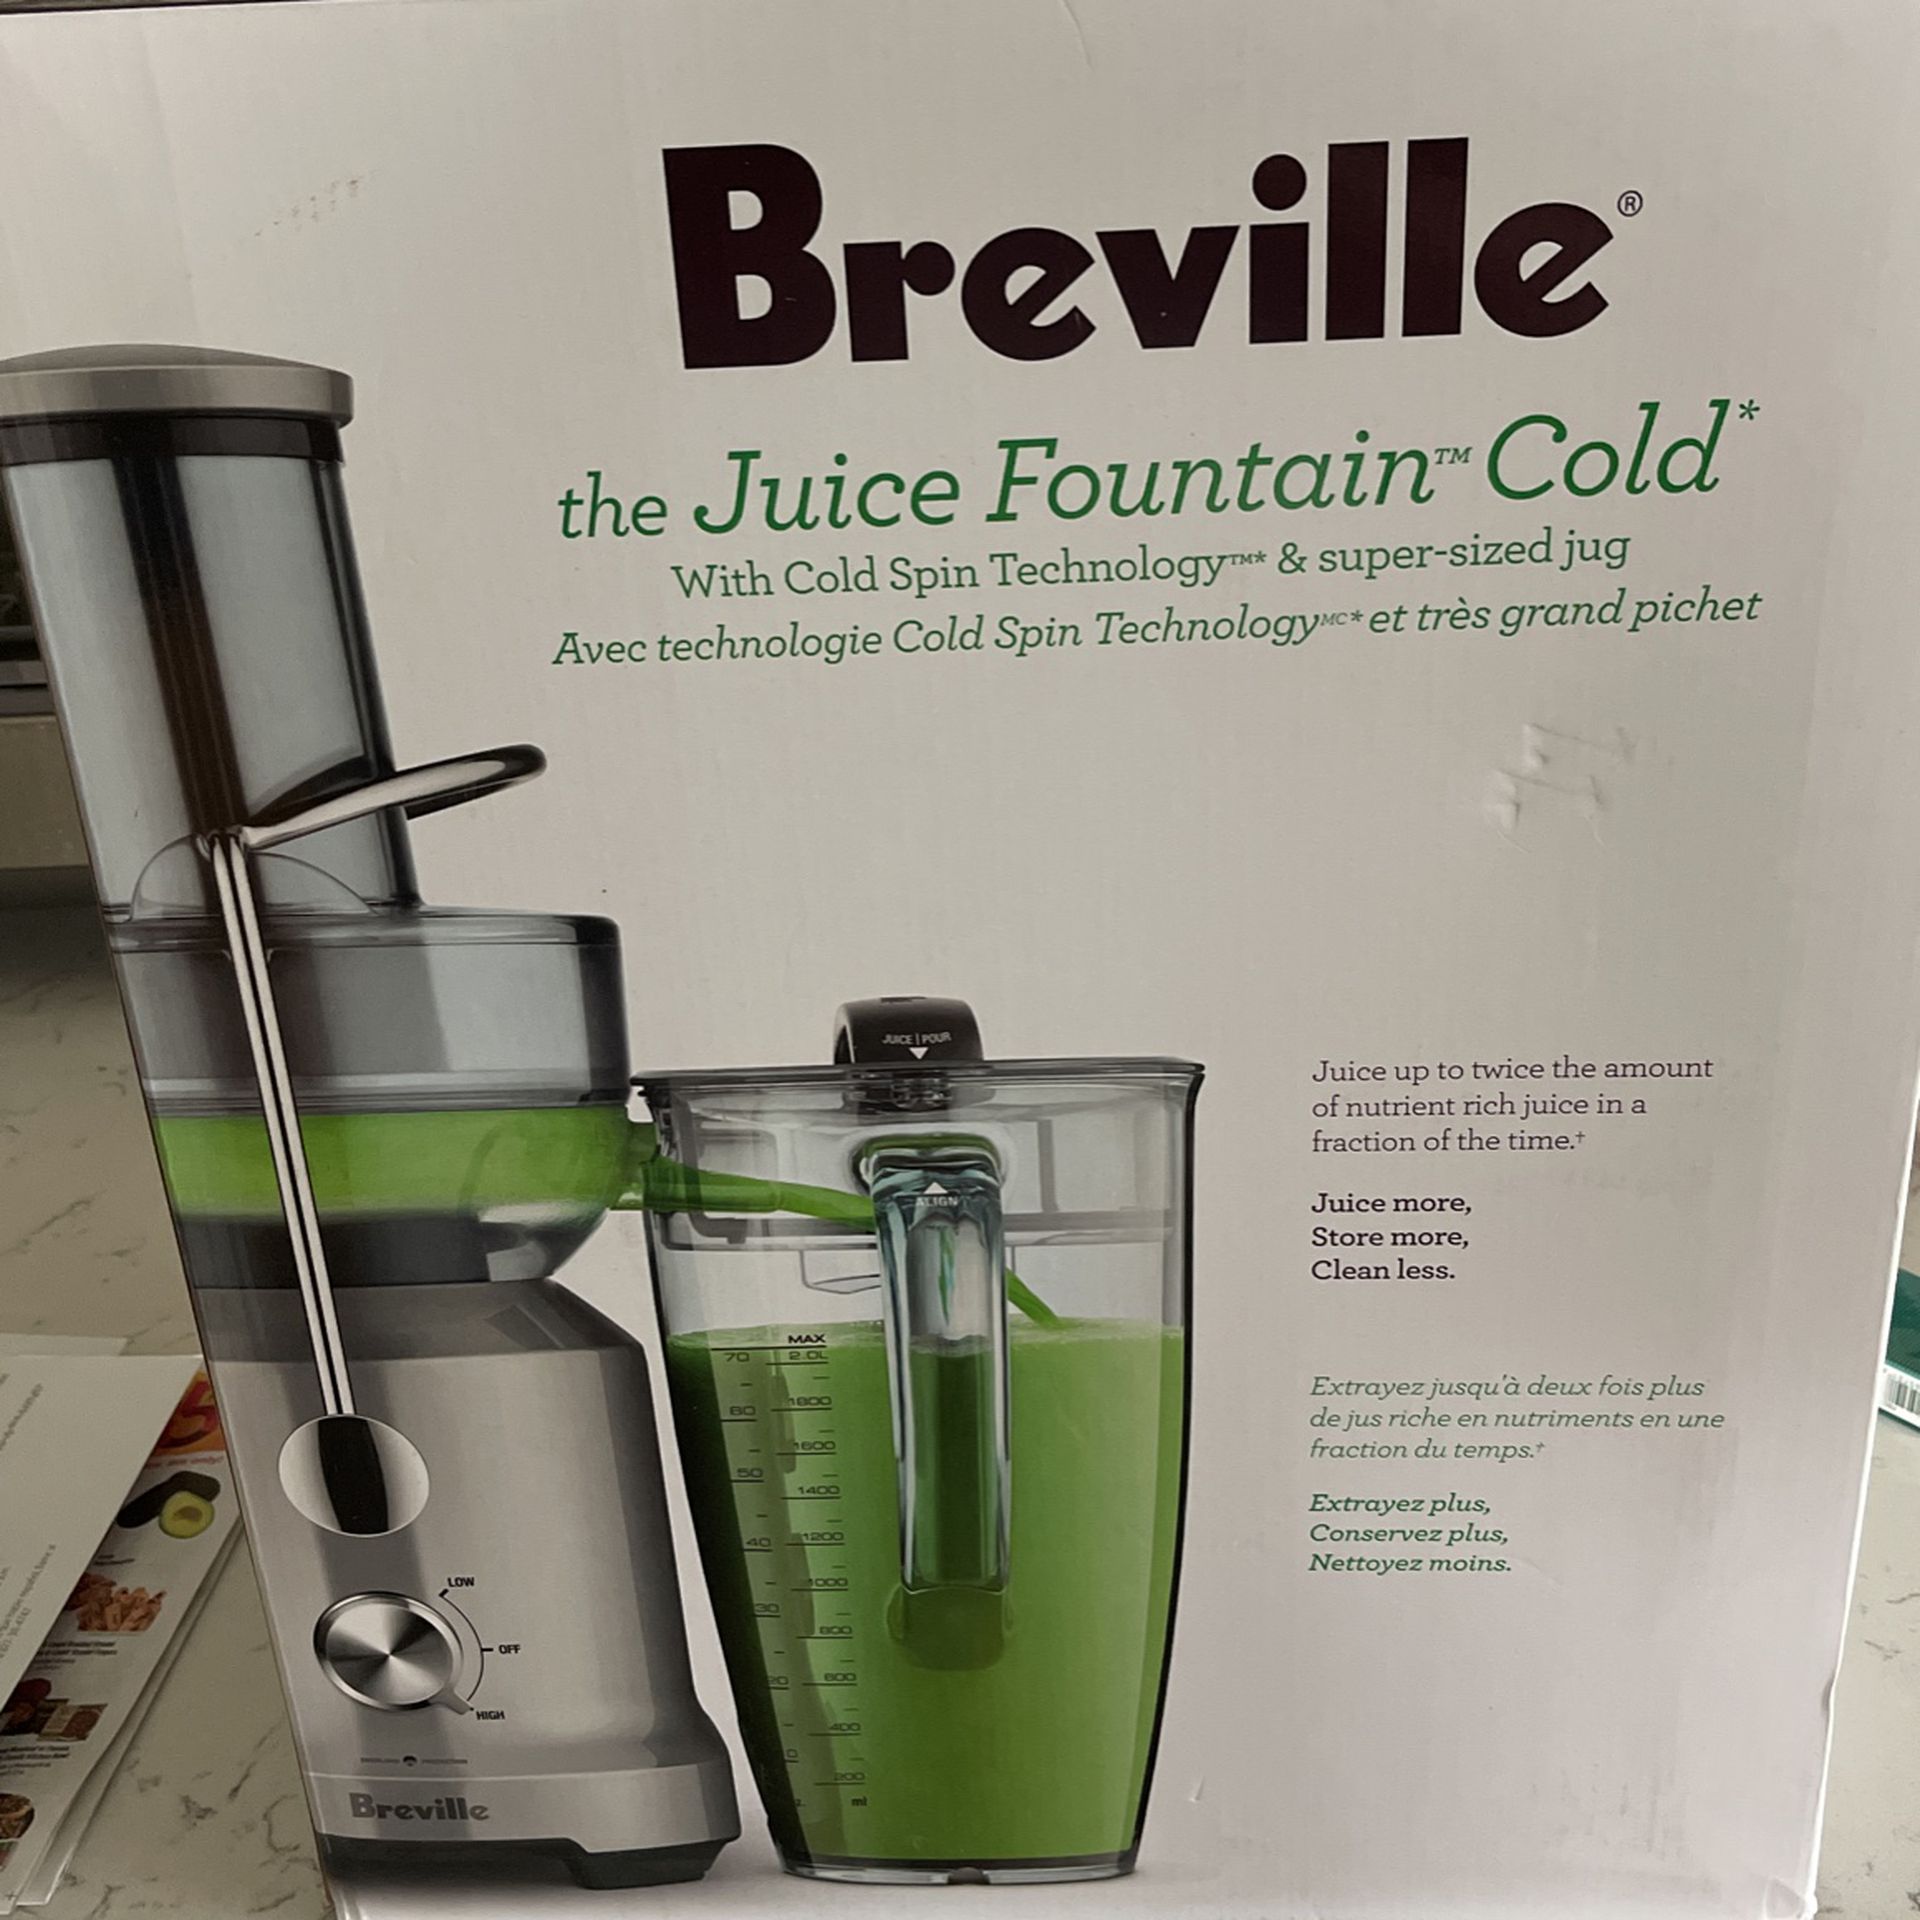 Breville Juicer Fountain Cold 